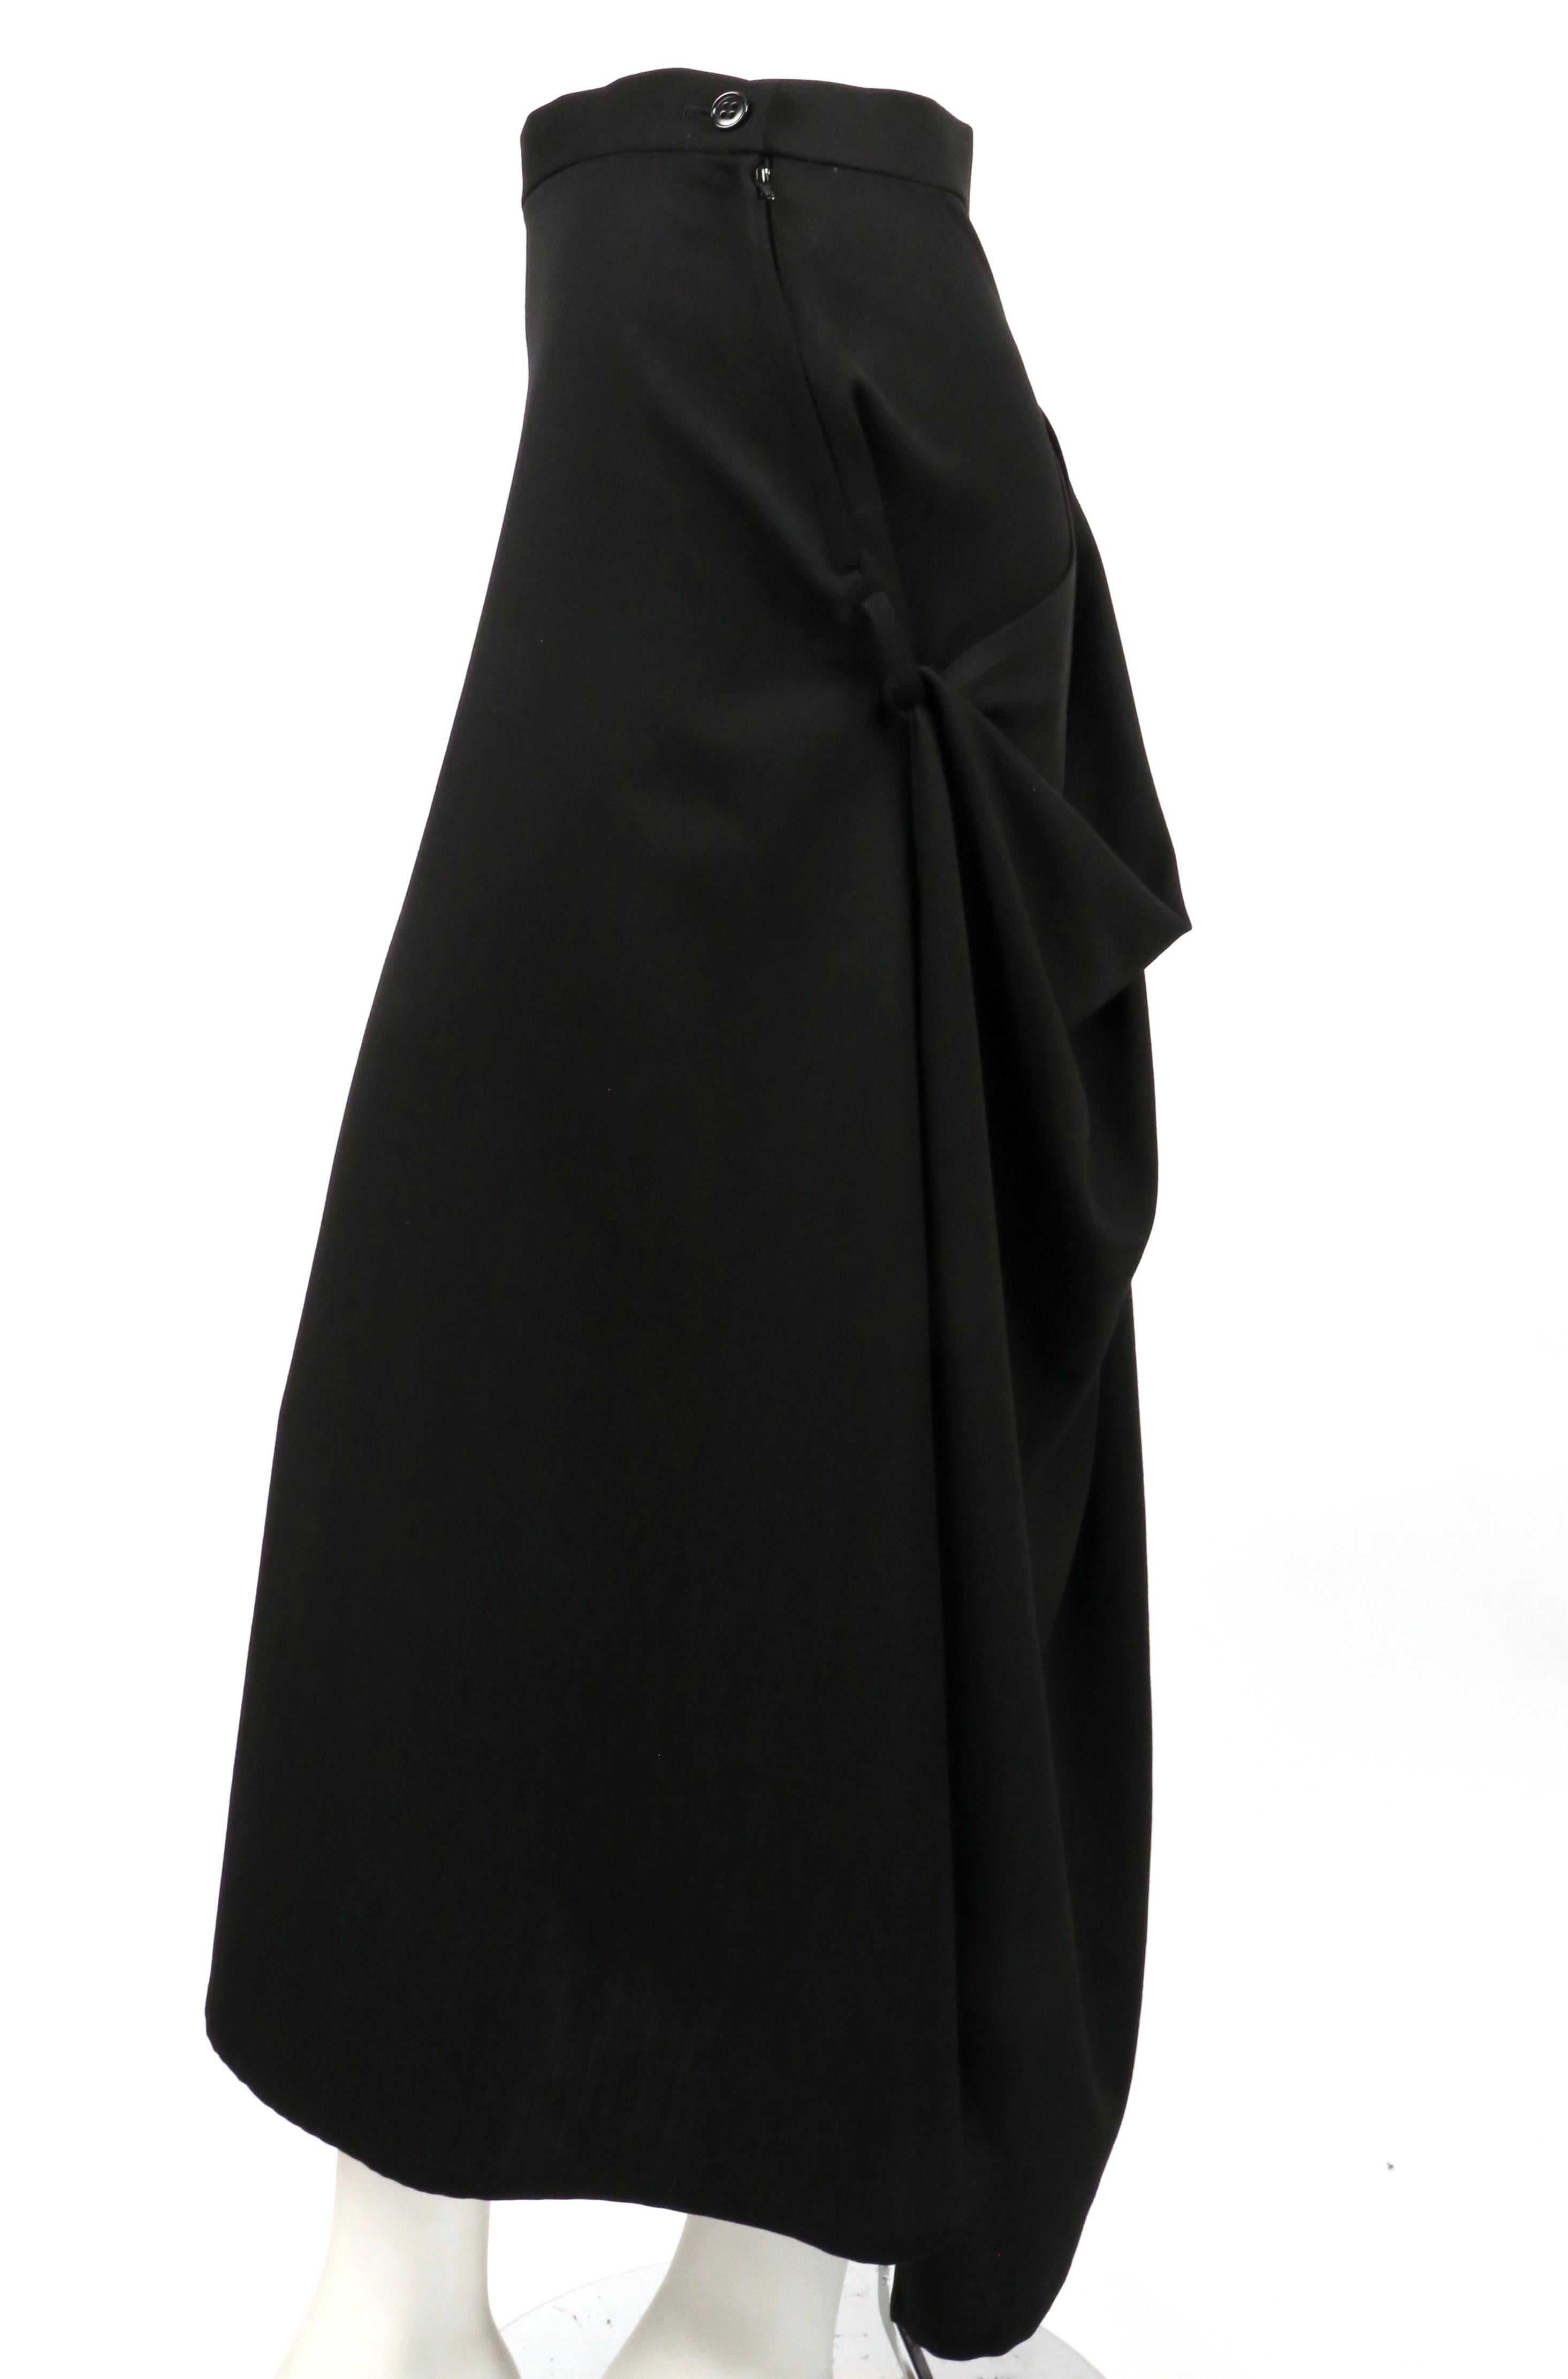 Jet-black draped wool skirt designed by Homma. Japanese size 3. Approximate measurements: waist 28